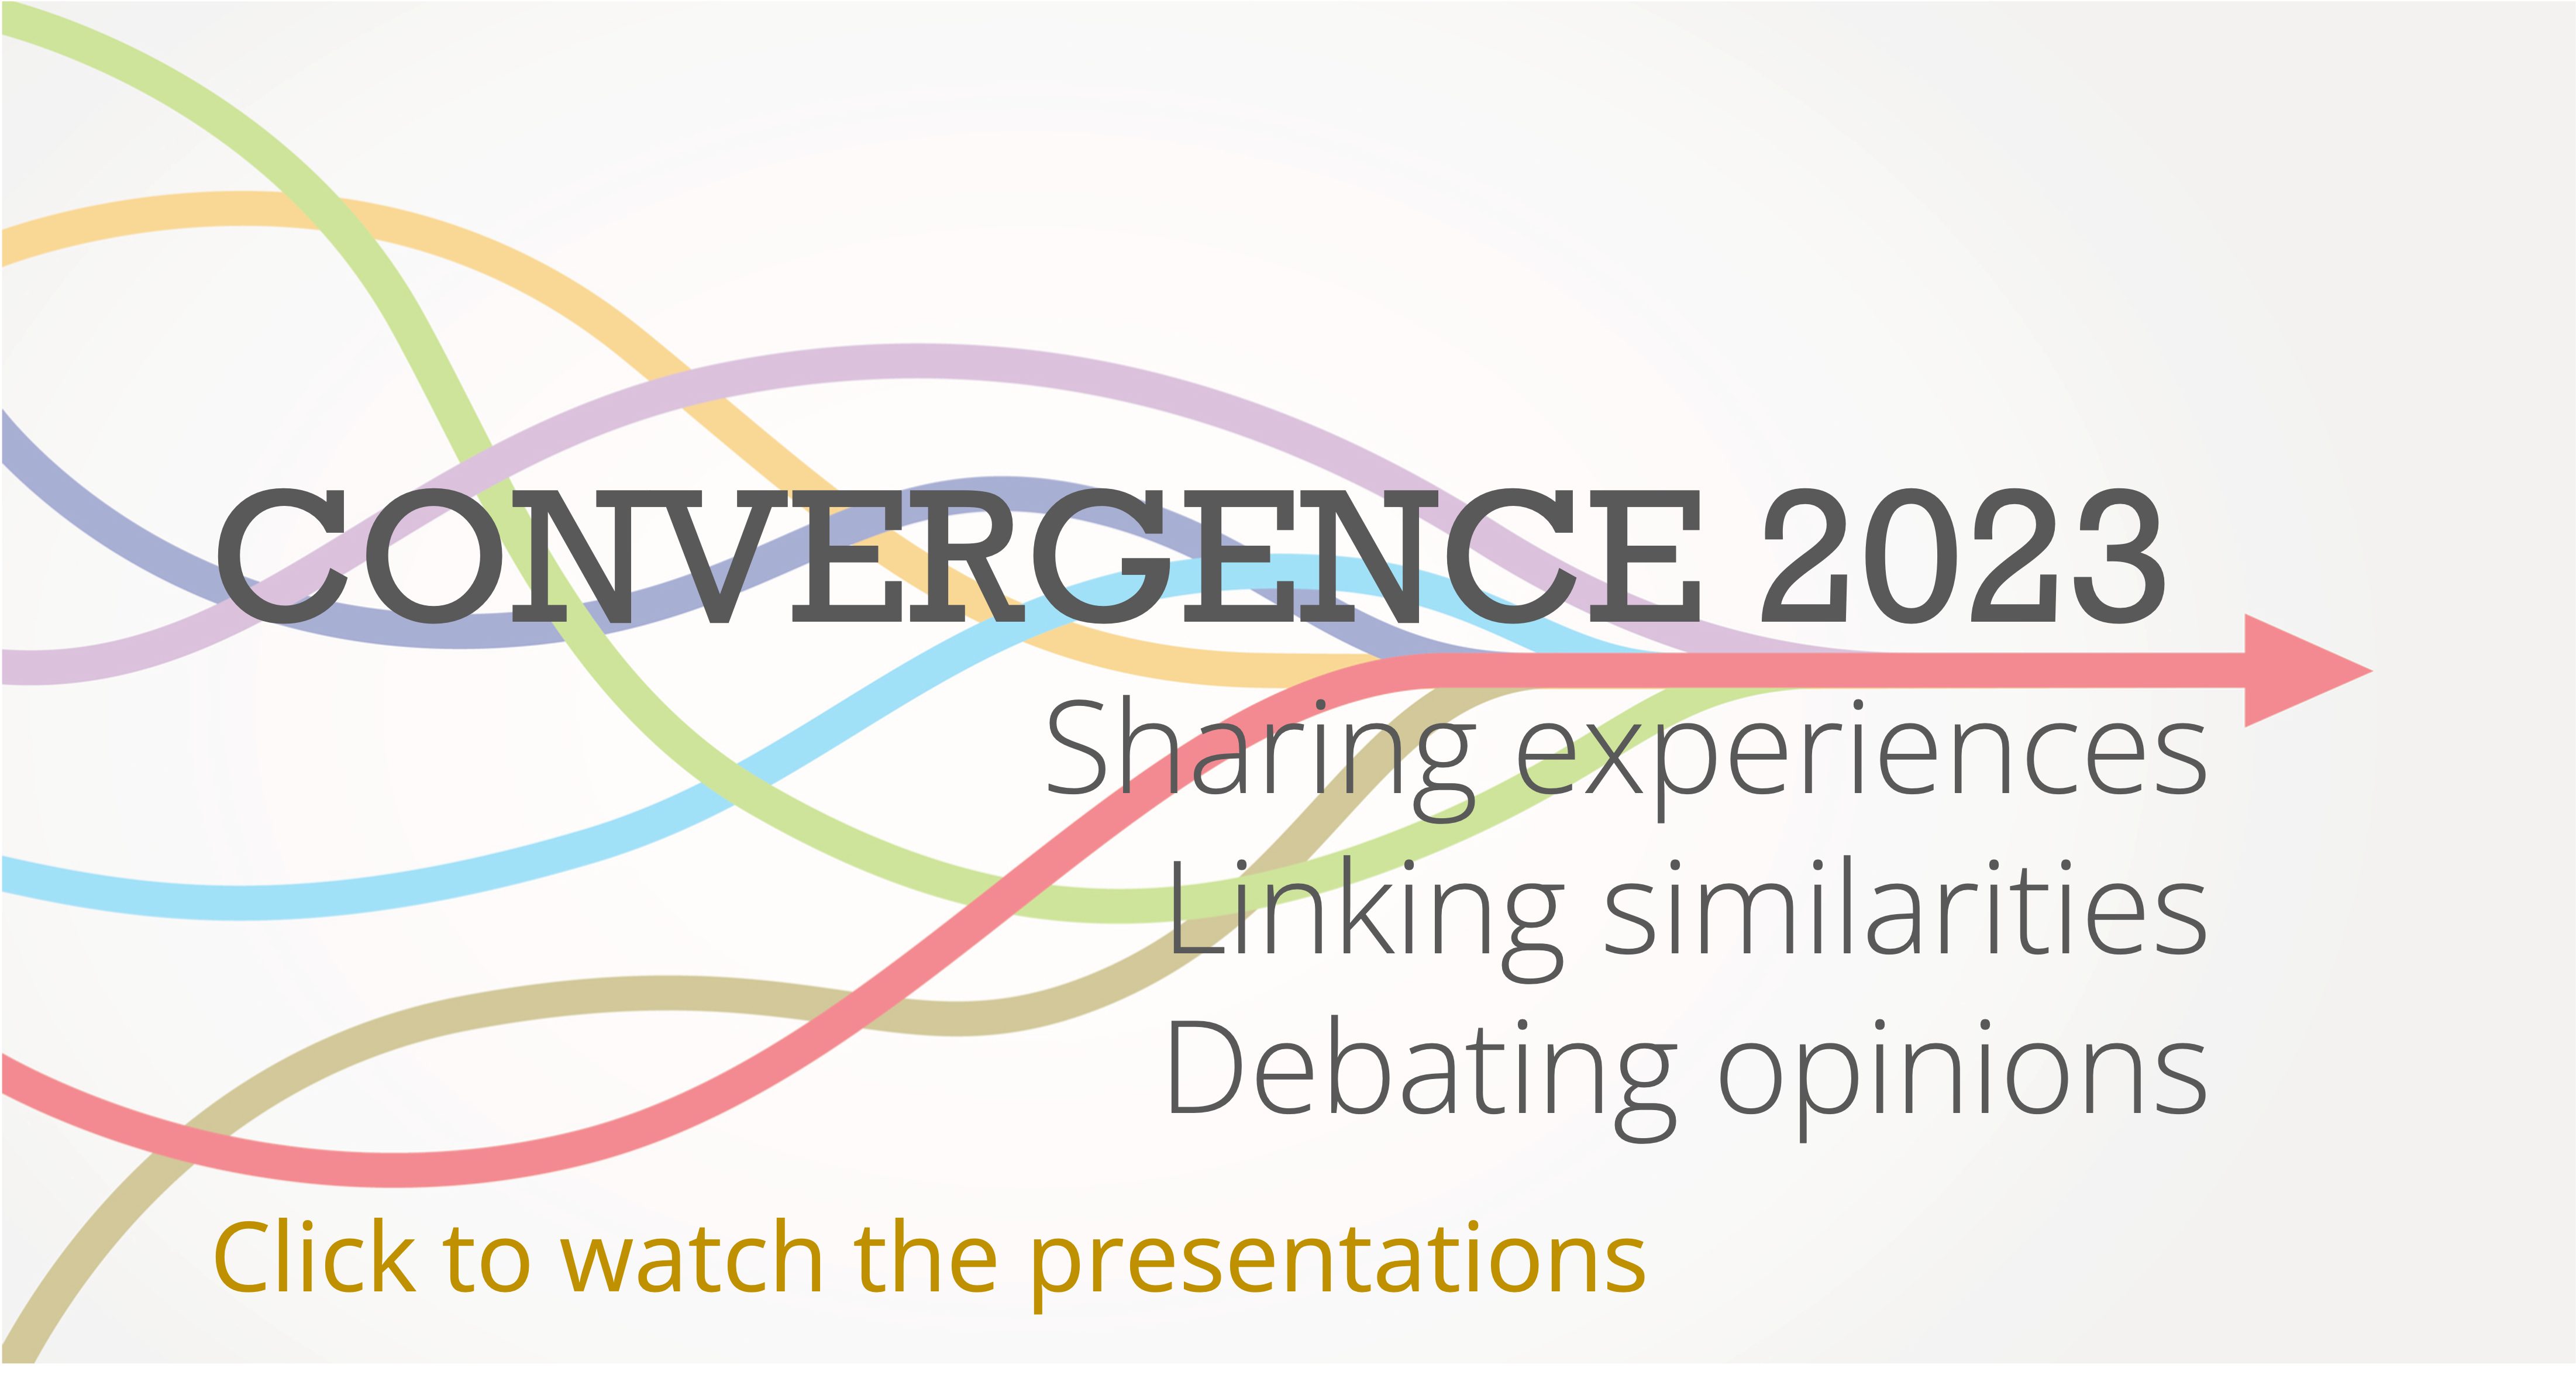 Click here to watch the Convergence 2023 video presentations